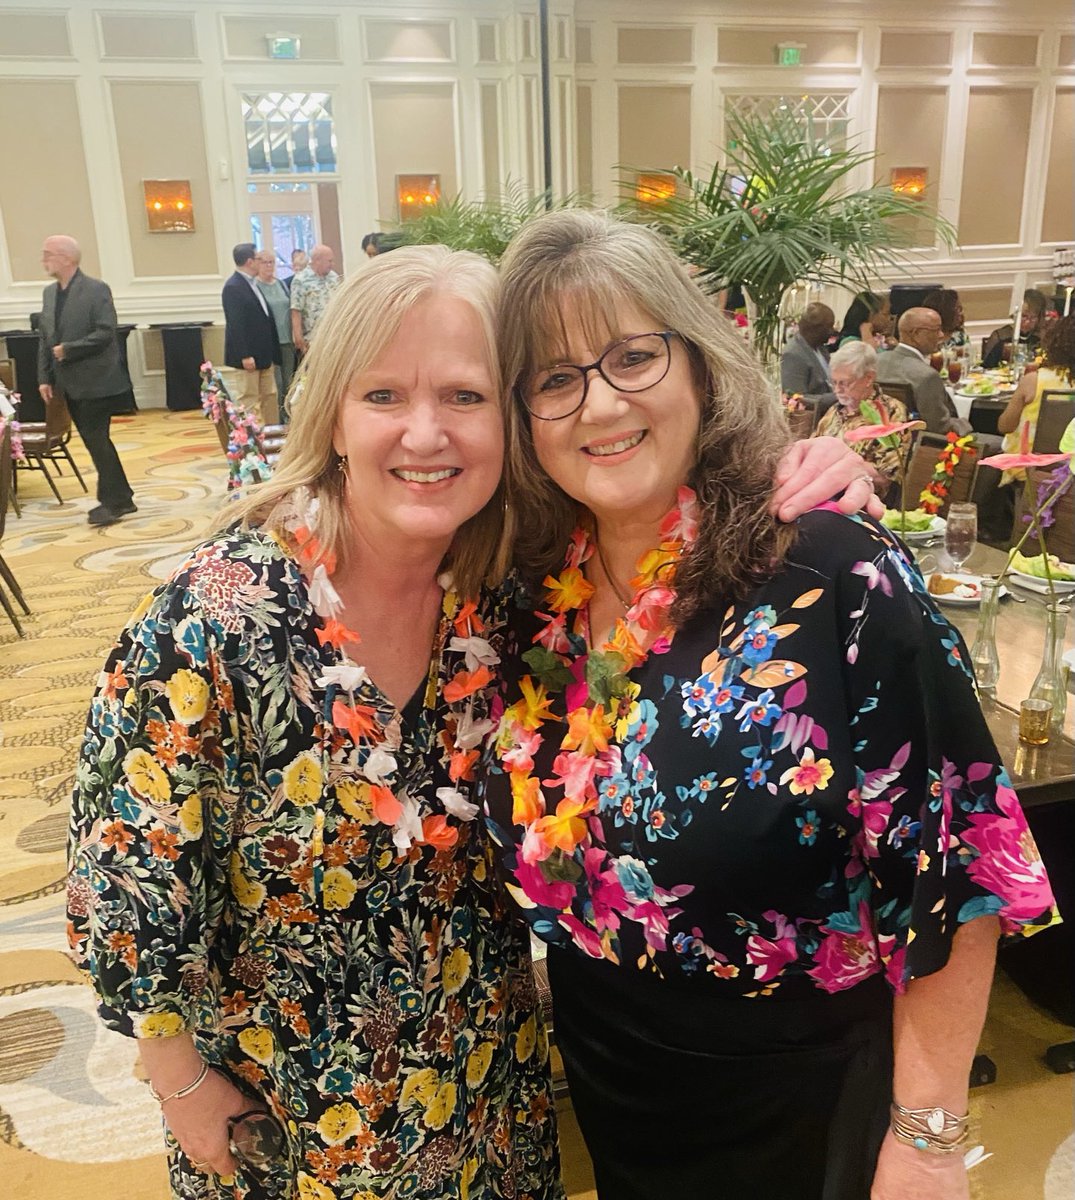 Celebrating the retirement of ⁦@memkesler⁩! 26 years ago she was my first administrator ⁦@AliefISD⁩. She became my mentor my first year as principal. #meaningrelationships are what we do and what makes us #aliefproud